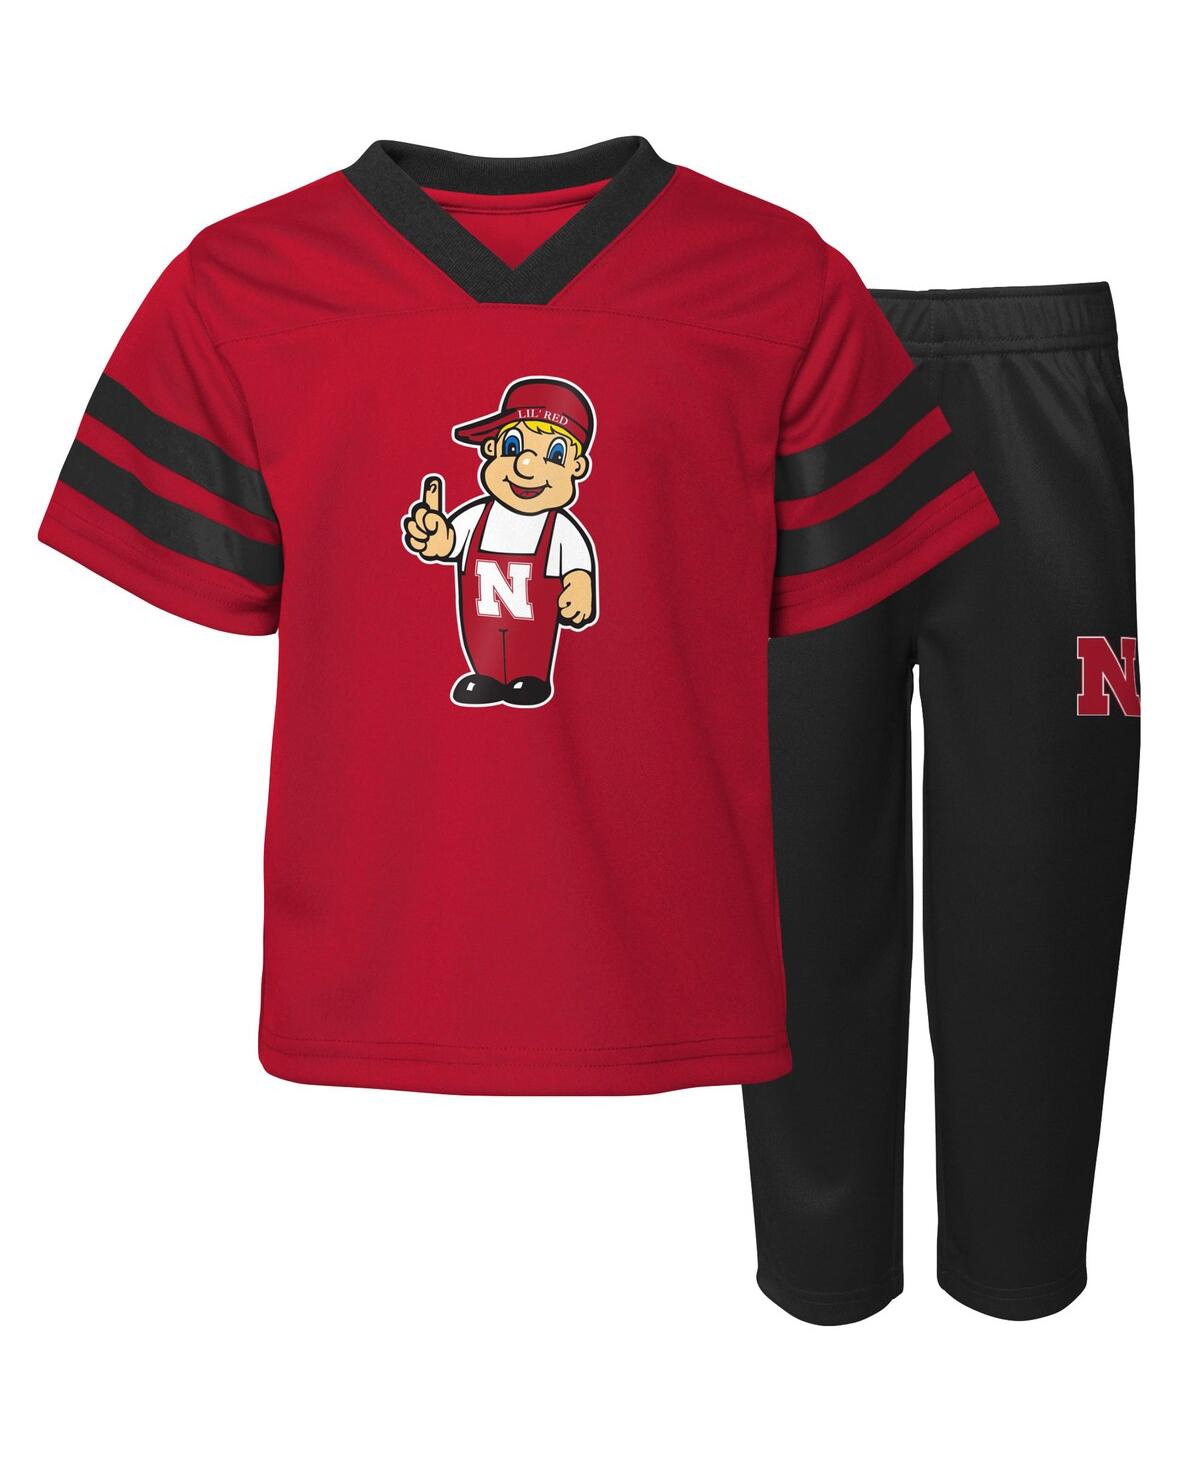 Outerstuff Babies' Toddler Boys And Girls Scarlet Nebraska Huskers Two-piece Red Zone Jersey And Pants Set